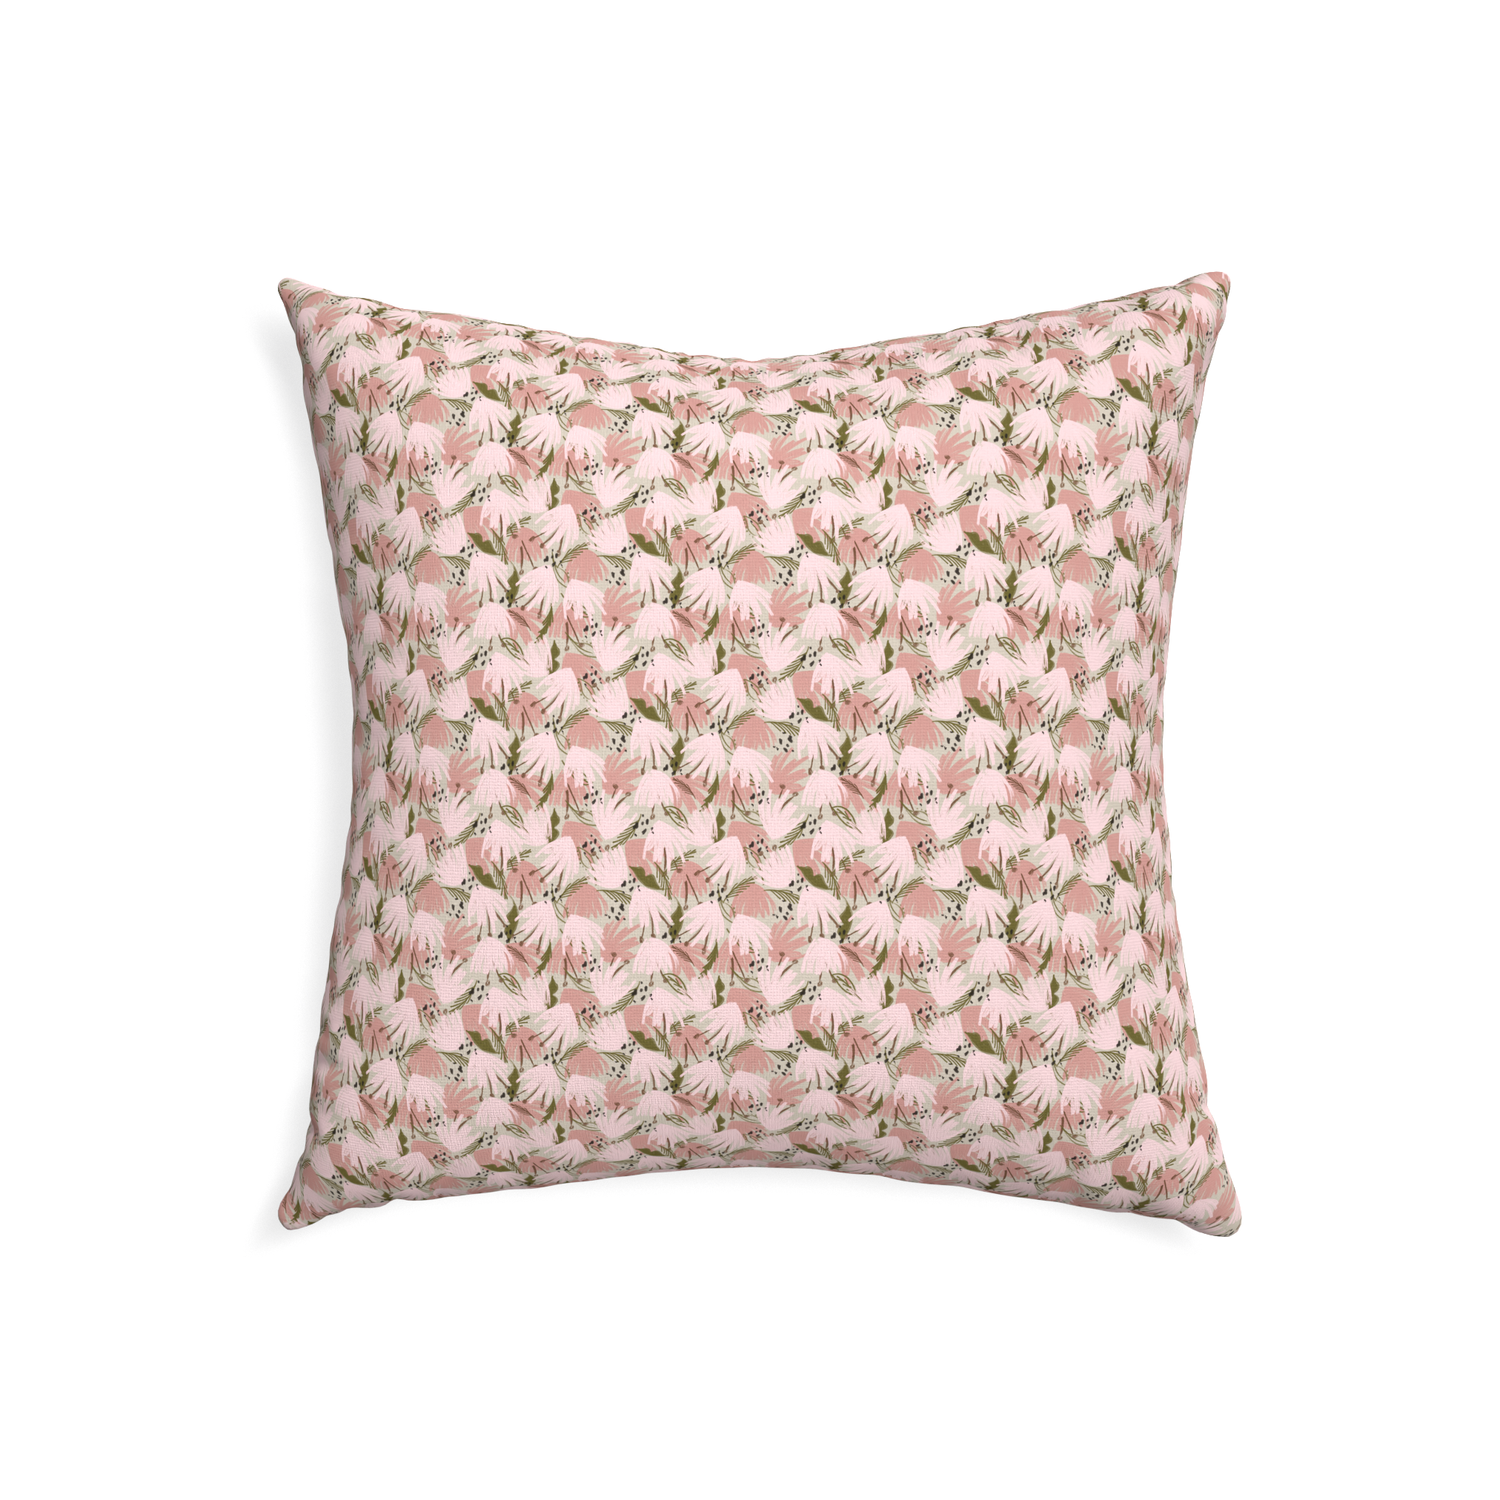 22-square eden pink custom pink floralpillow with none on white background